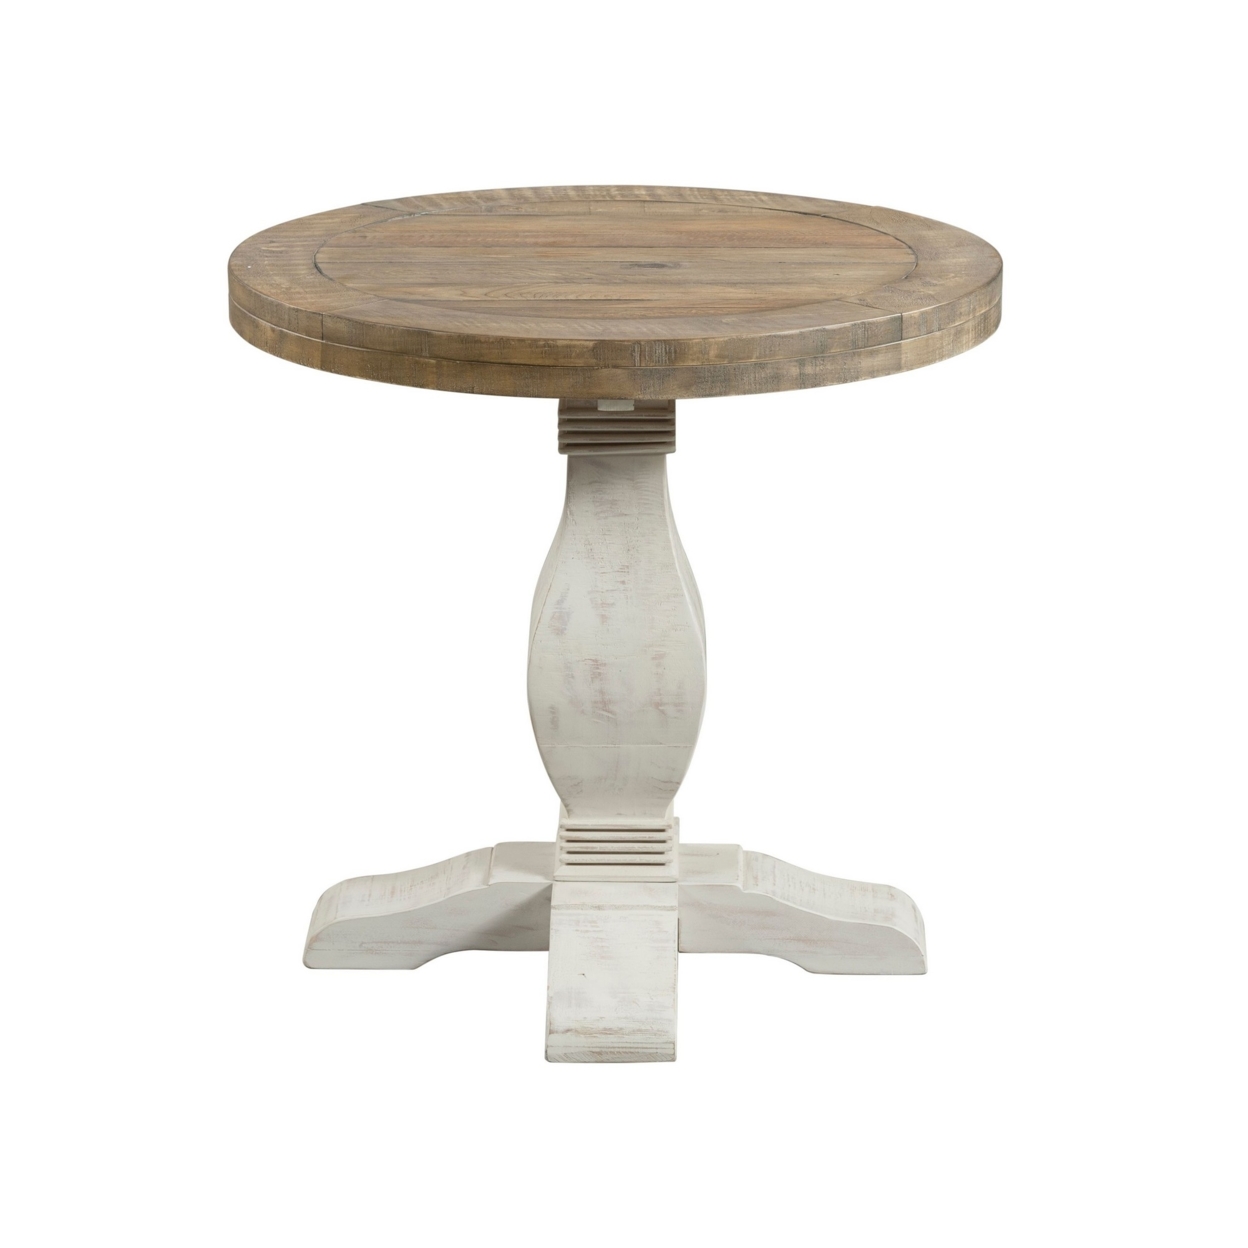 26 Inch Round End Table With Pedestal Base, Brown And White- Saltoro Sherpi